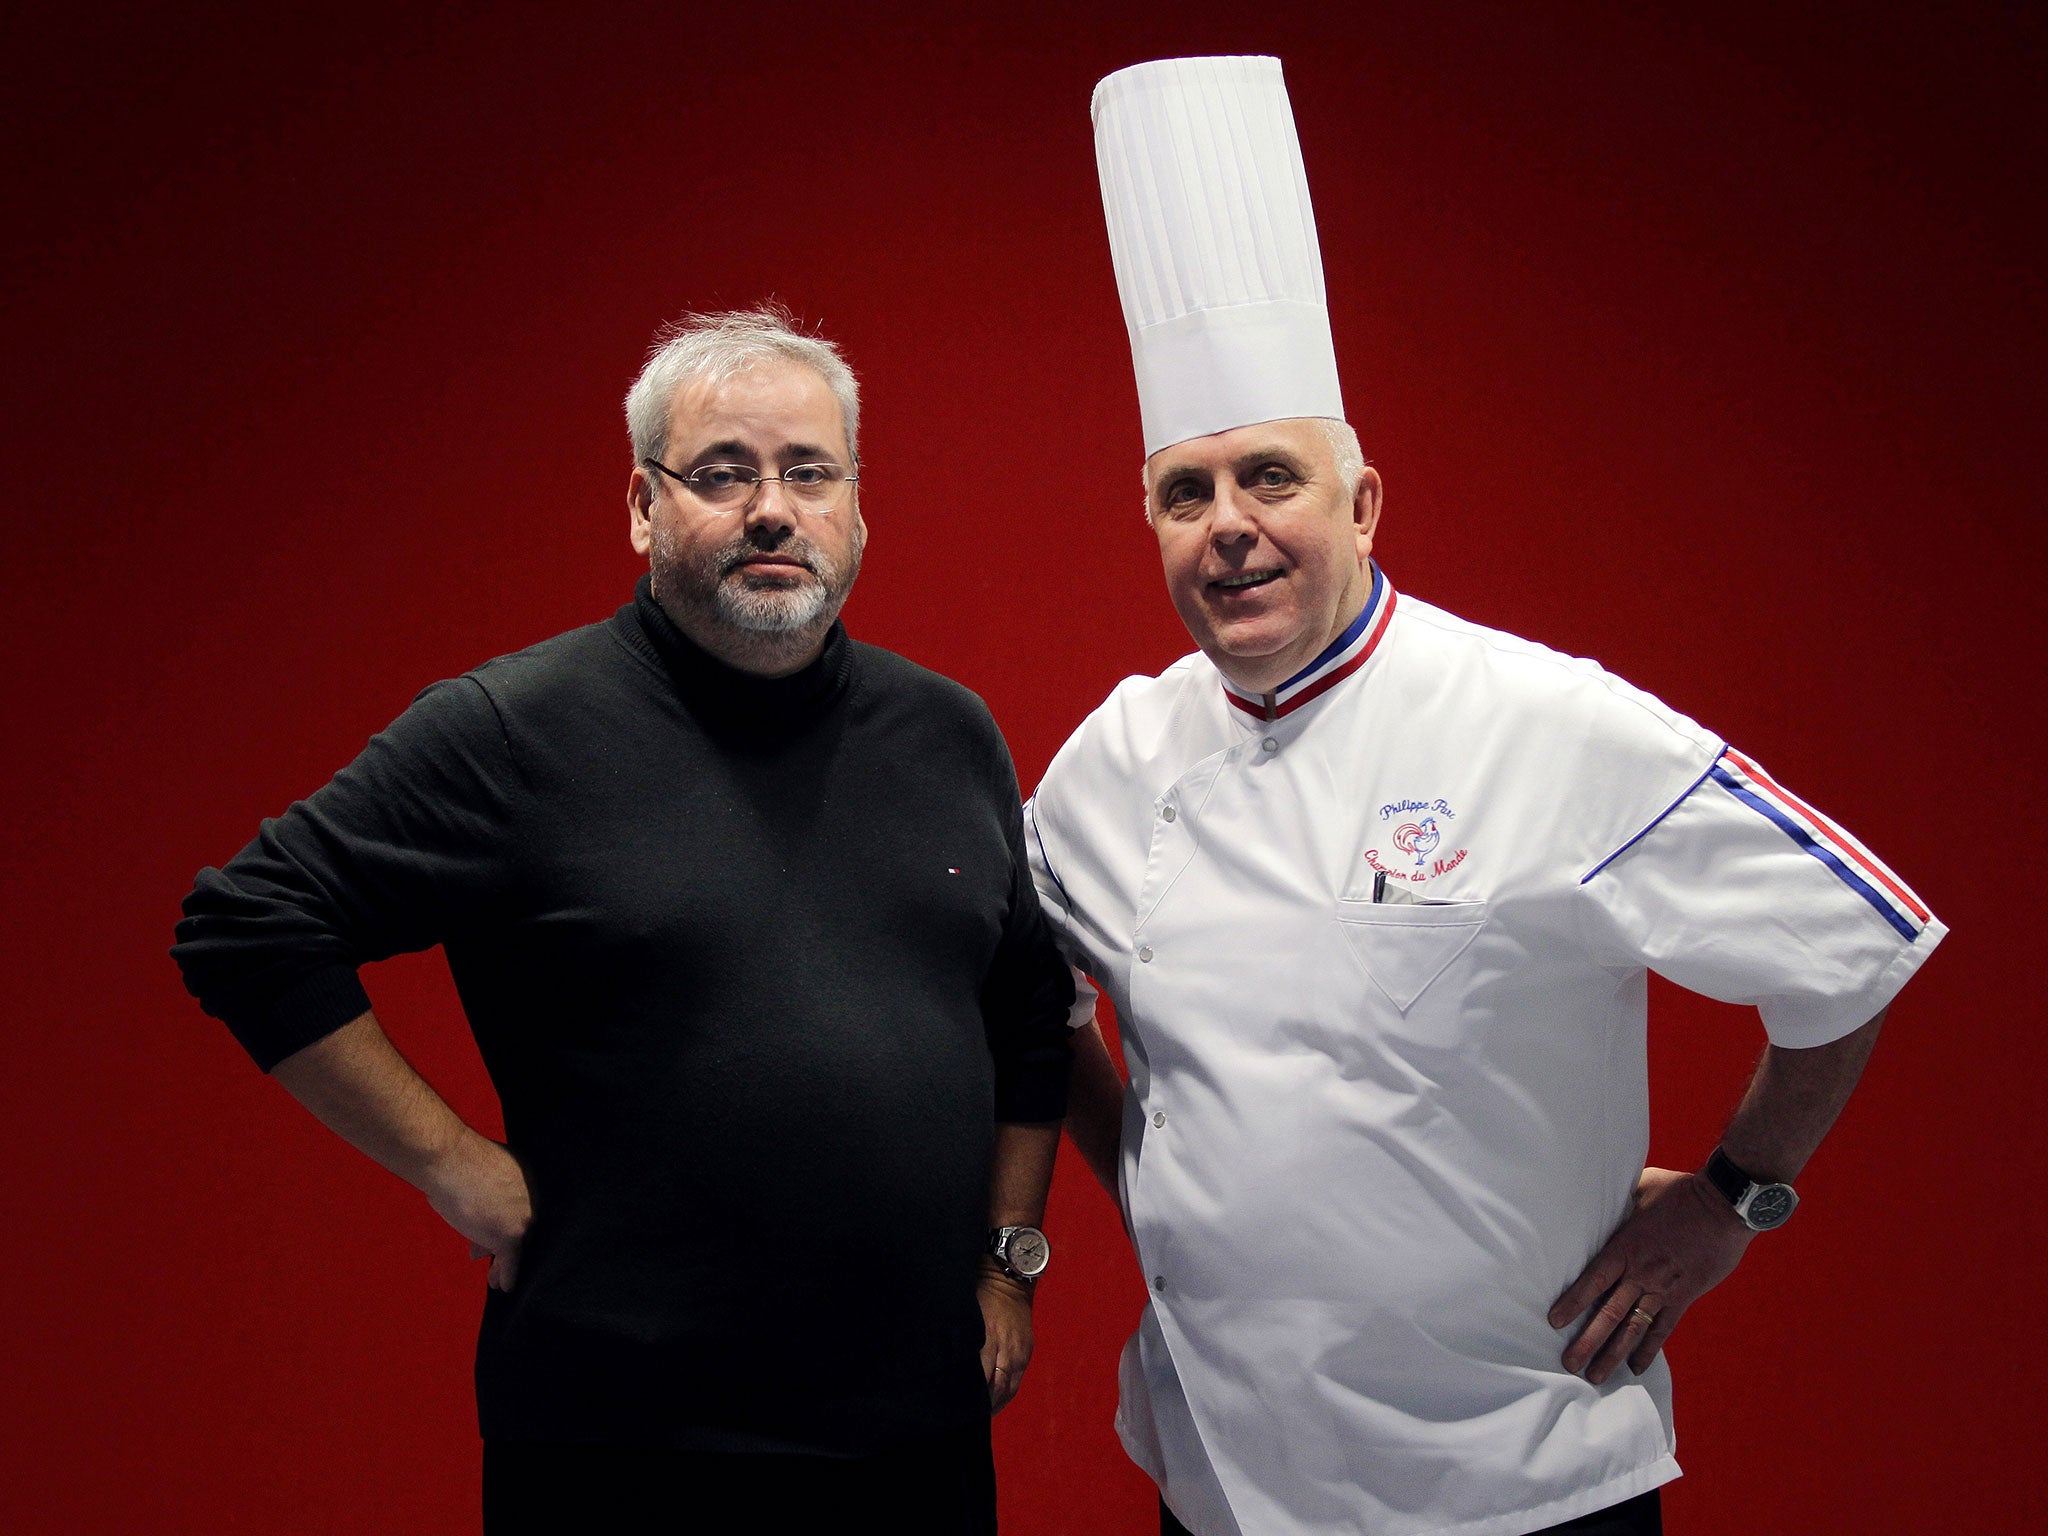 Jeannette owner Georges Viana and pastry chef Philippe Parc